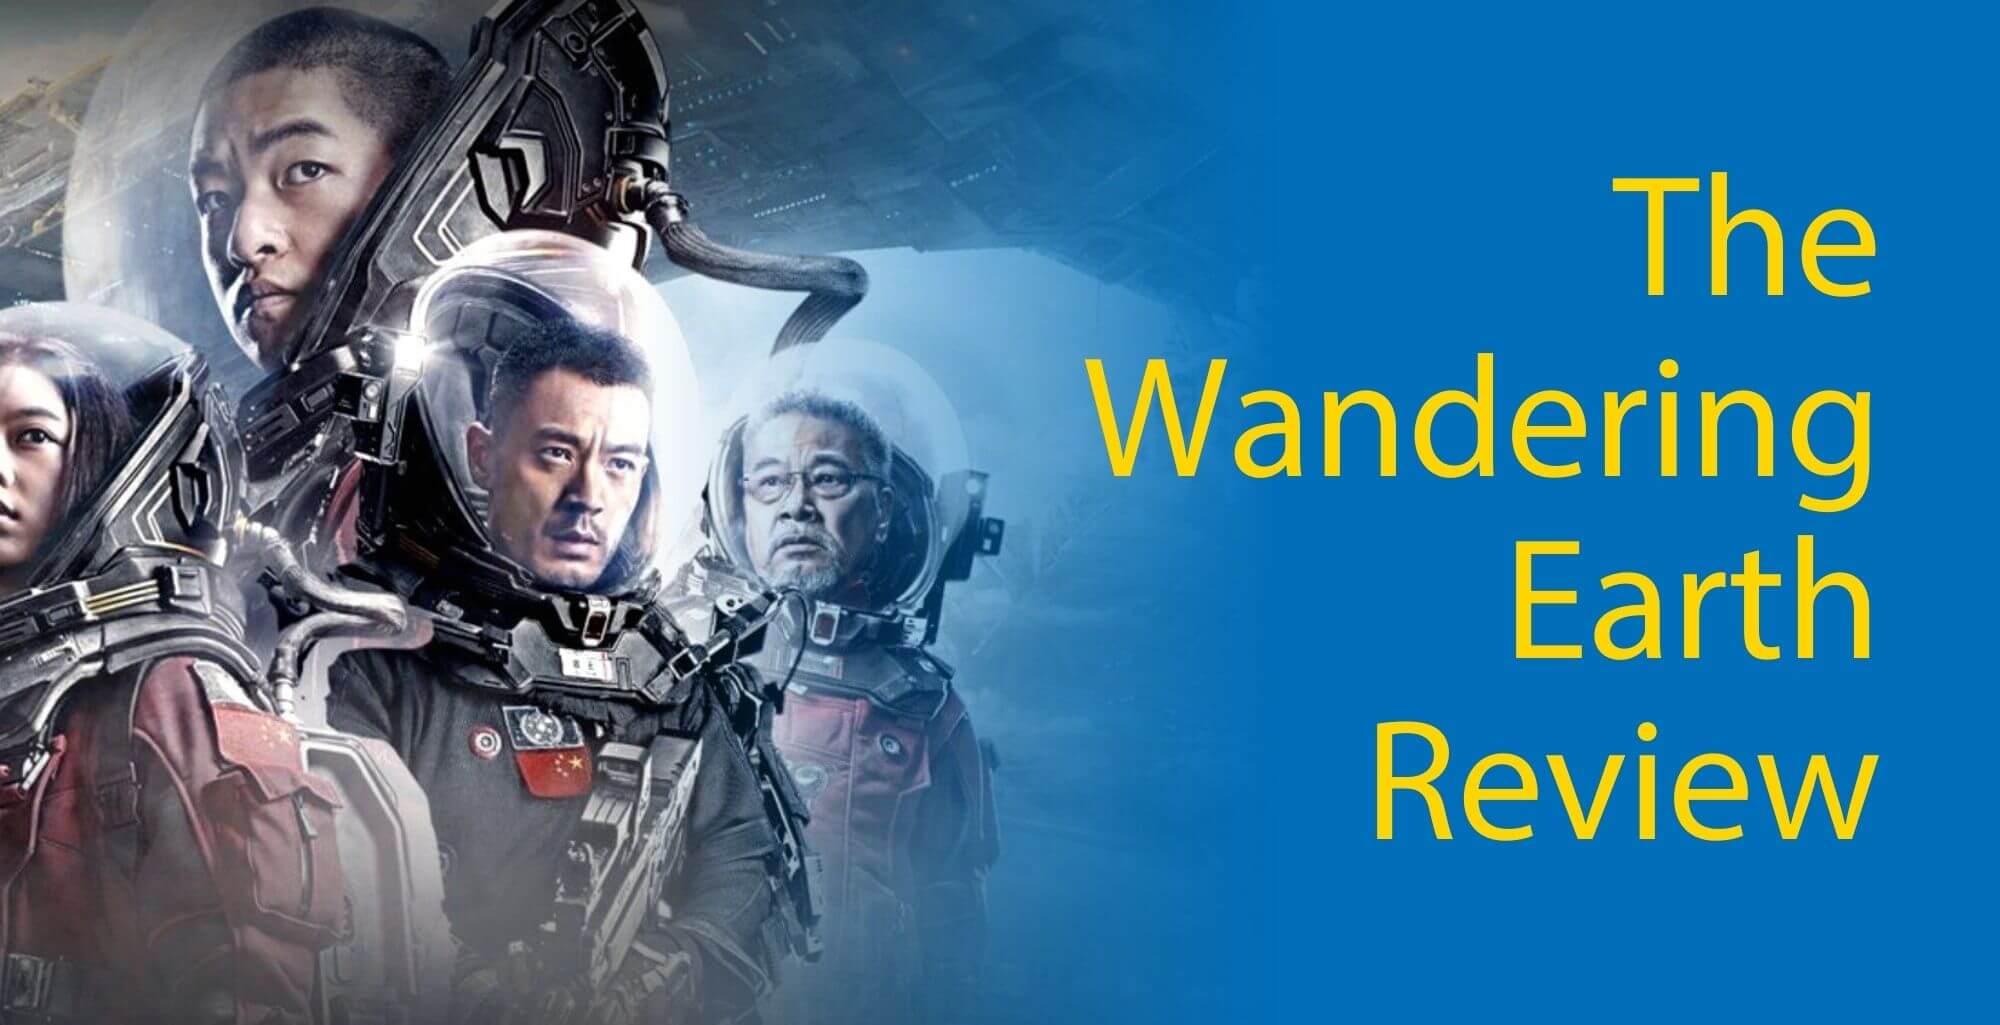 wandering earth book review